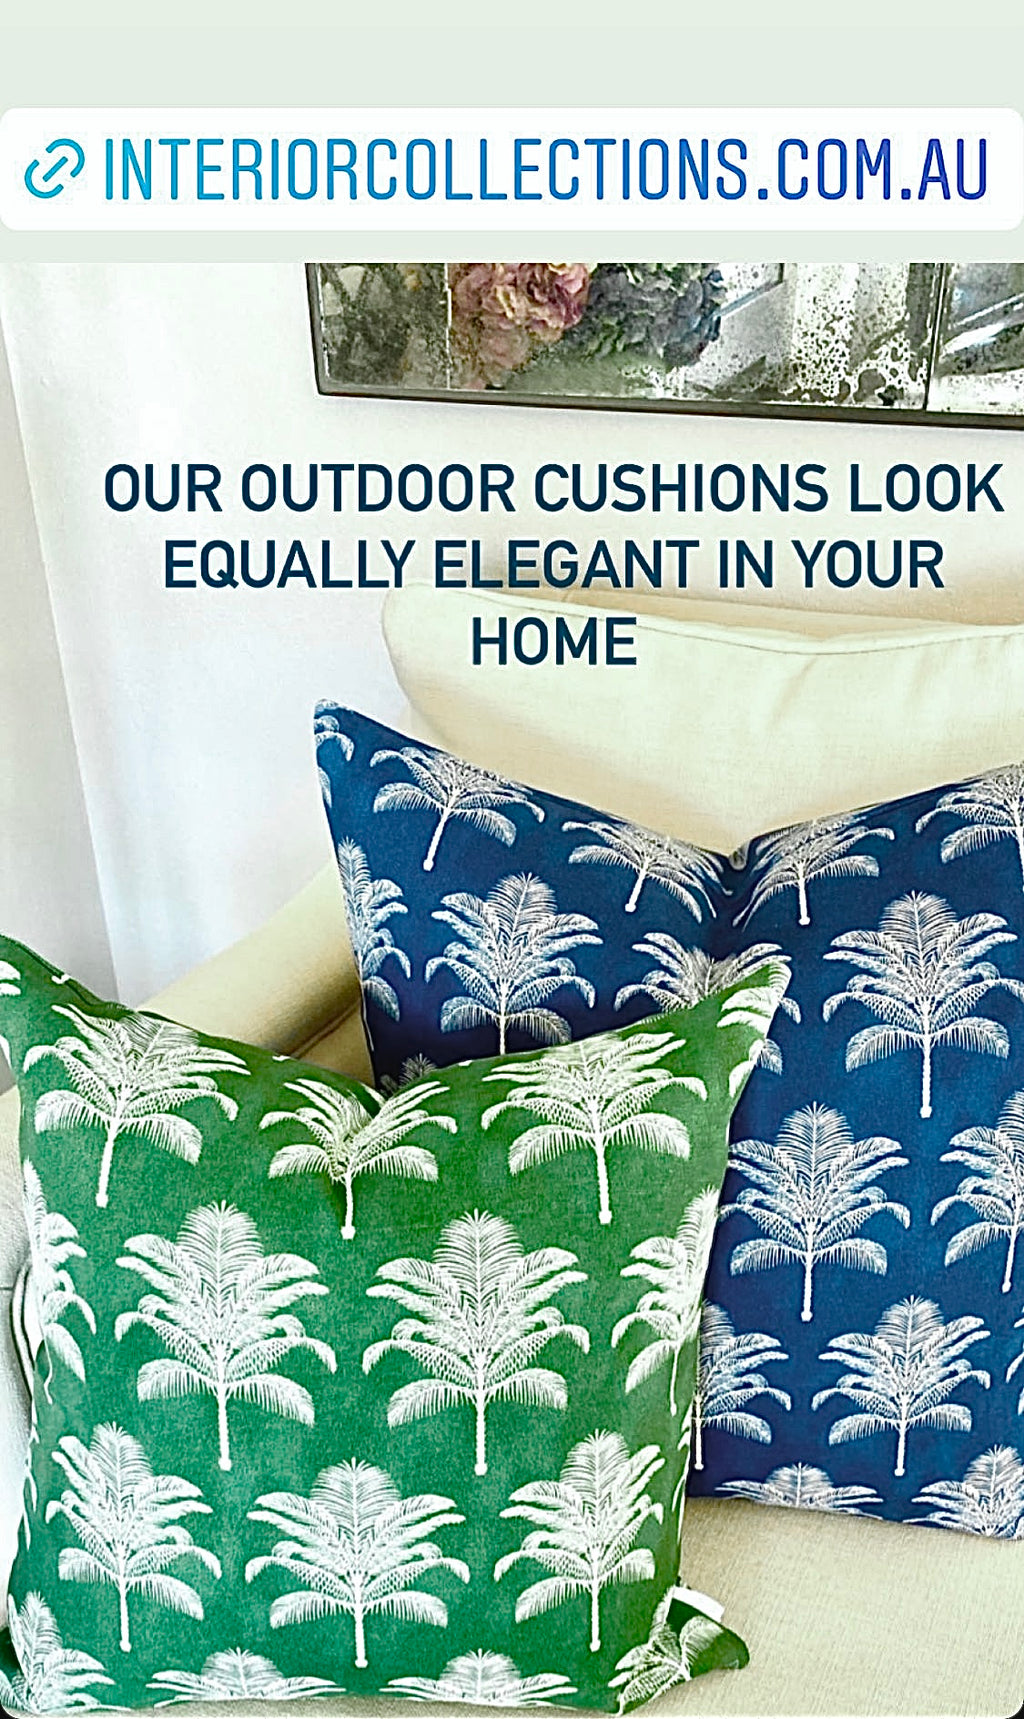 Vintage Palm Trees Navy Blue Cushion Cover, vintage palm trees navy cushion, indoor/outdoor palm cushions, indoor/outdoor coastal cushions, navy blue palm tree cushion, outdoor cushions, navy palm cushions, 